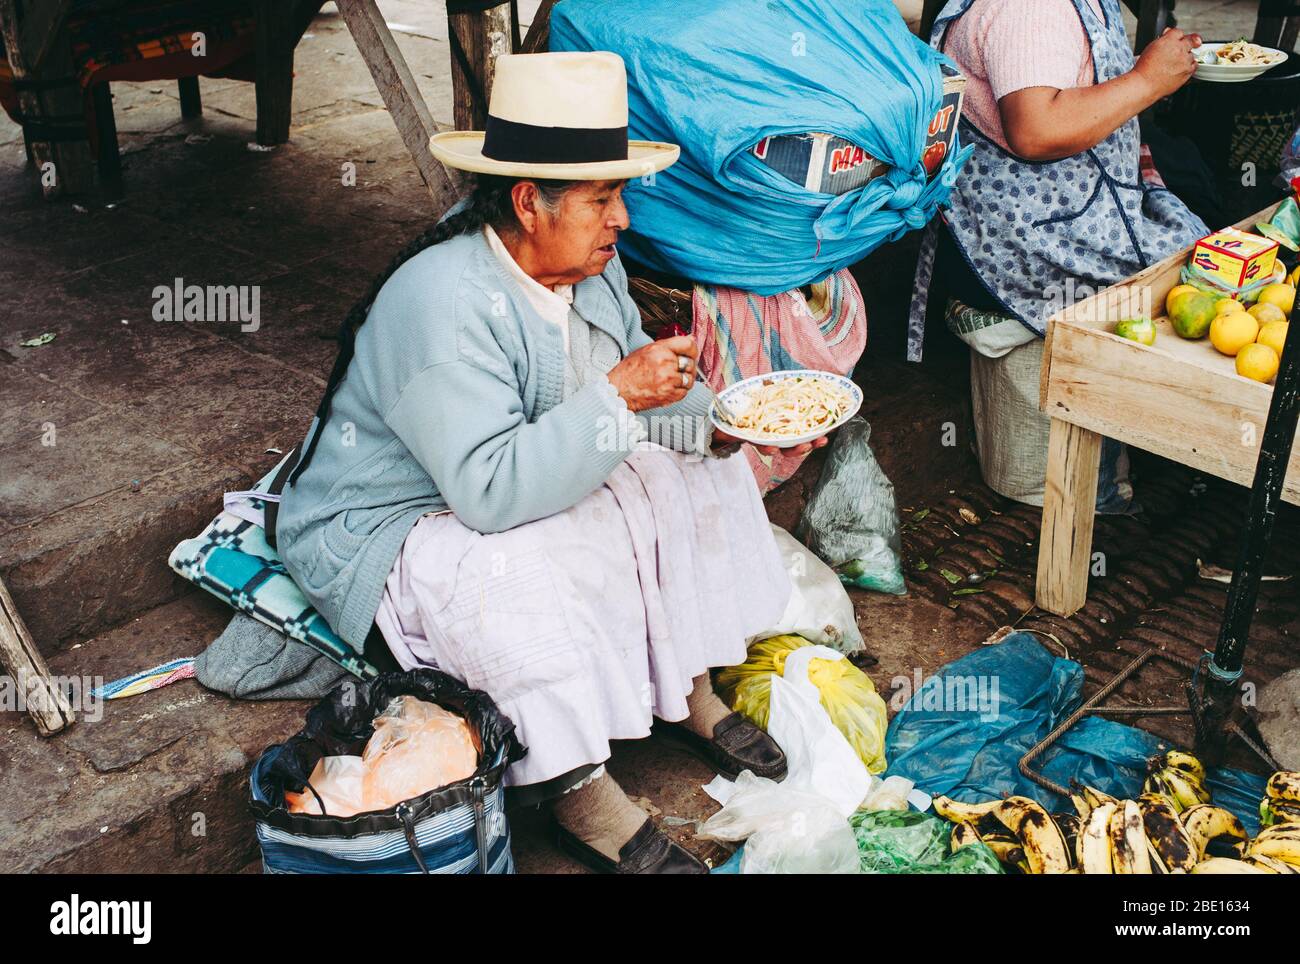 Pisac, Peru - July 29 2010: Local Elderly Woman Eating Noodles on an Indio Market in Peru Wearing a Straw Hat. Stock Photo